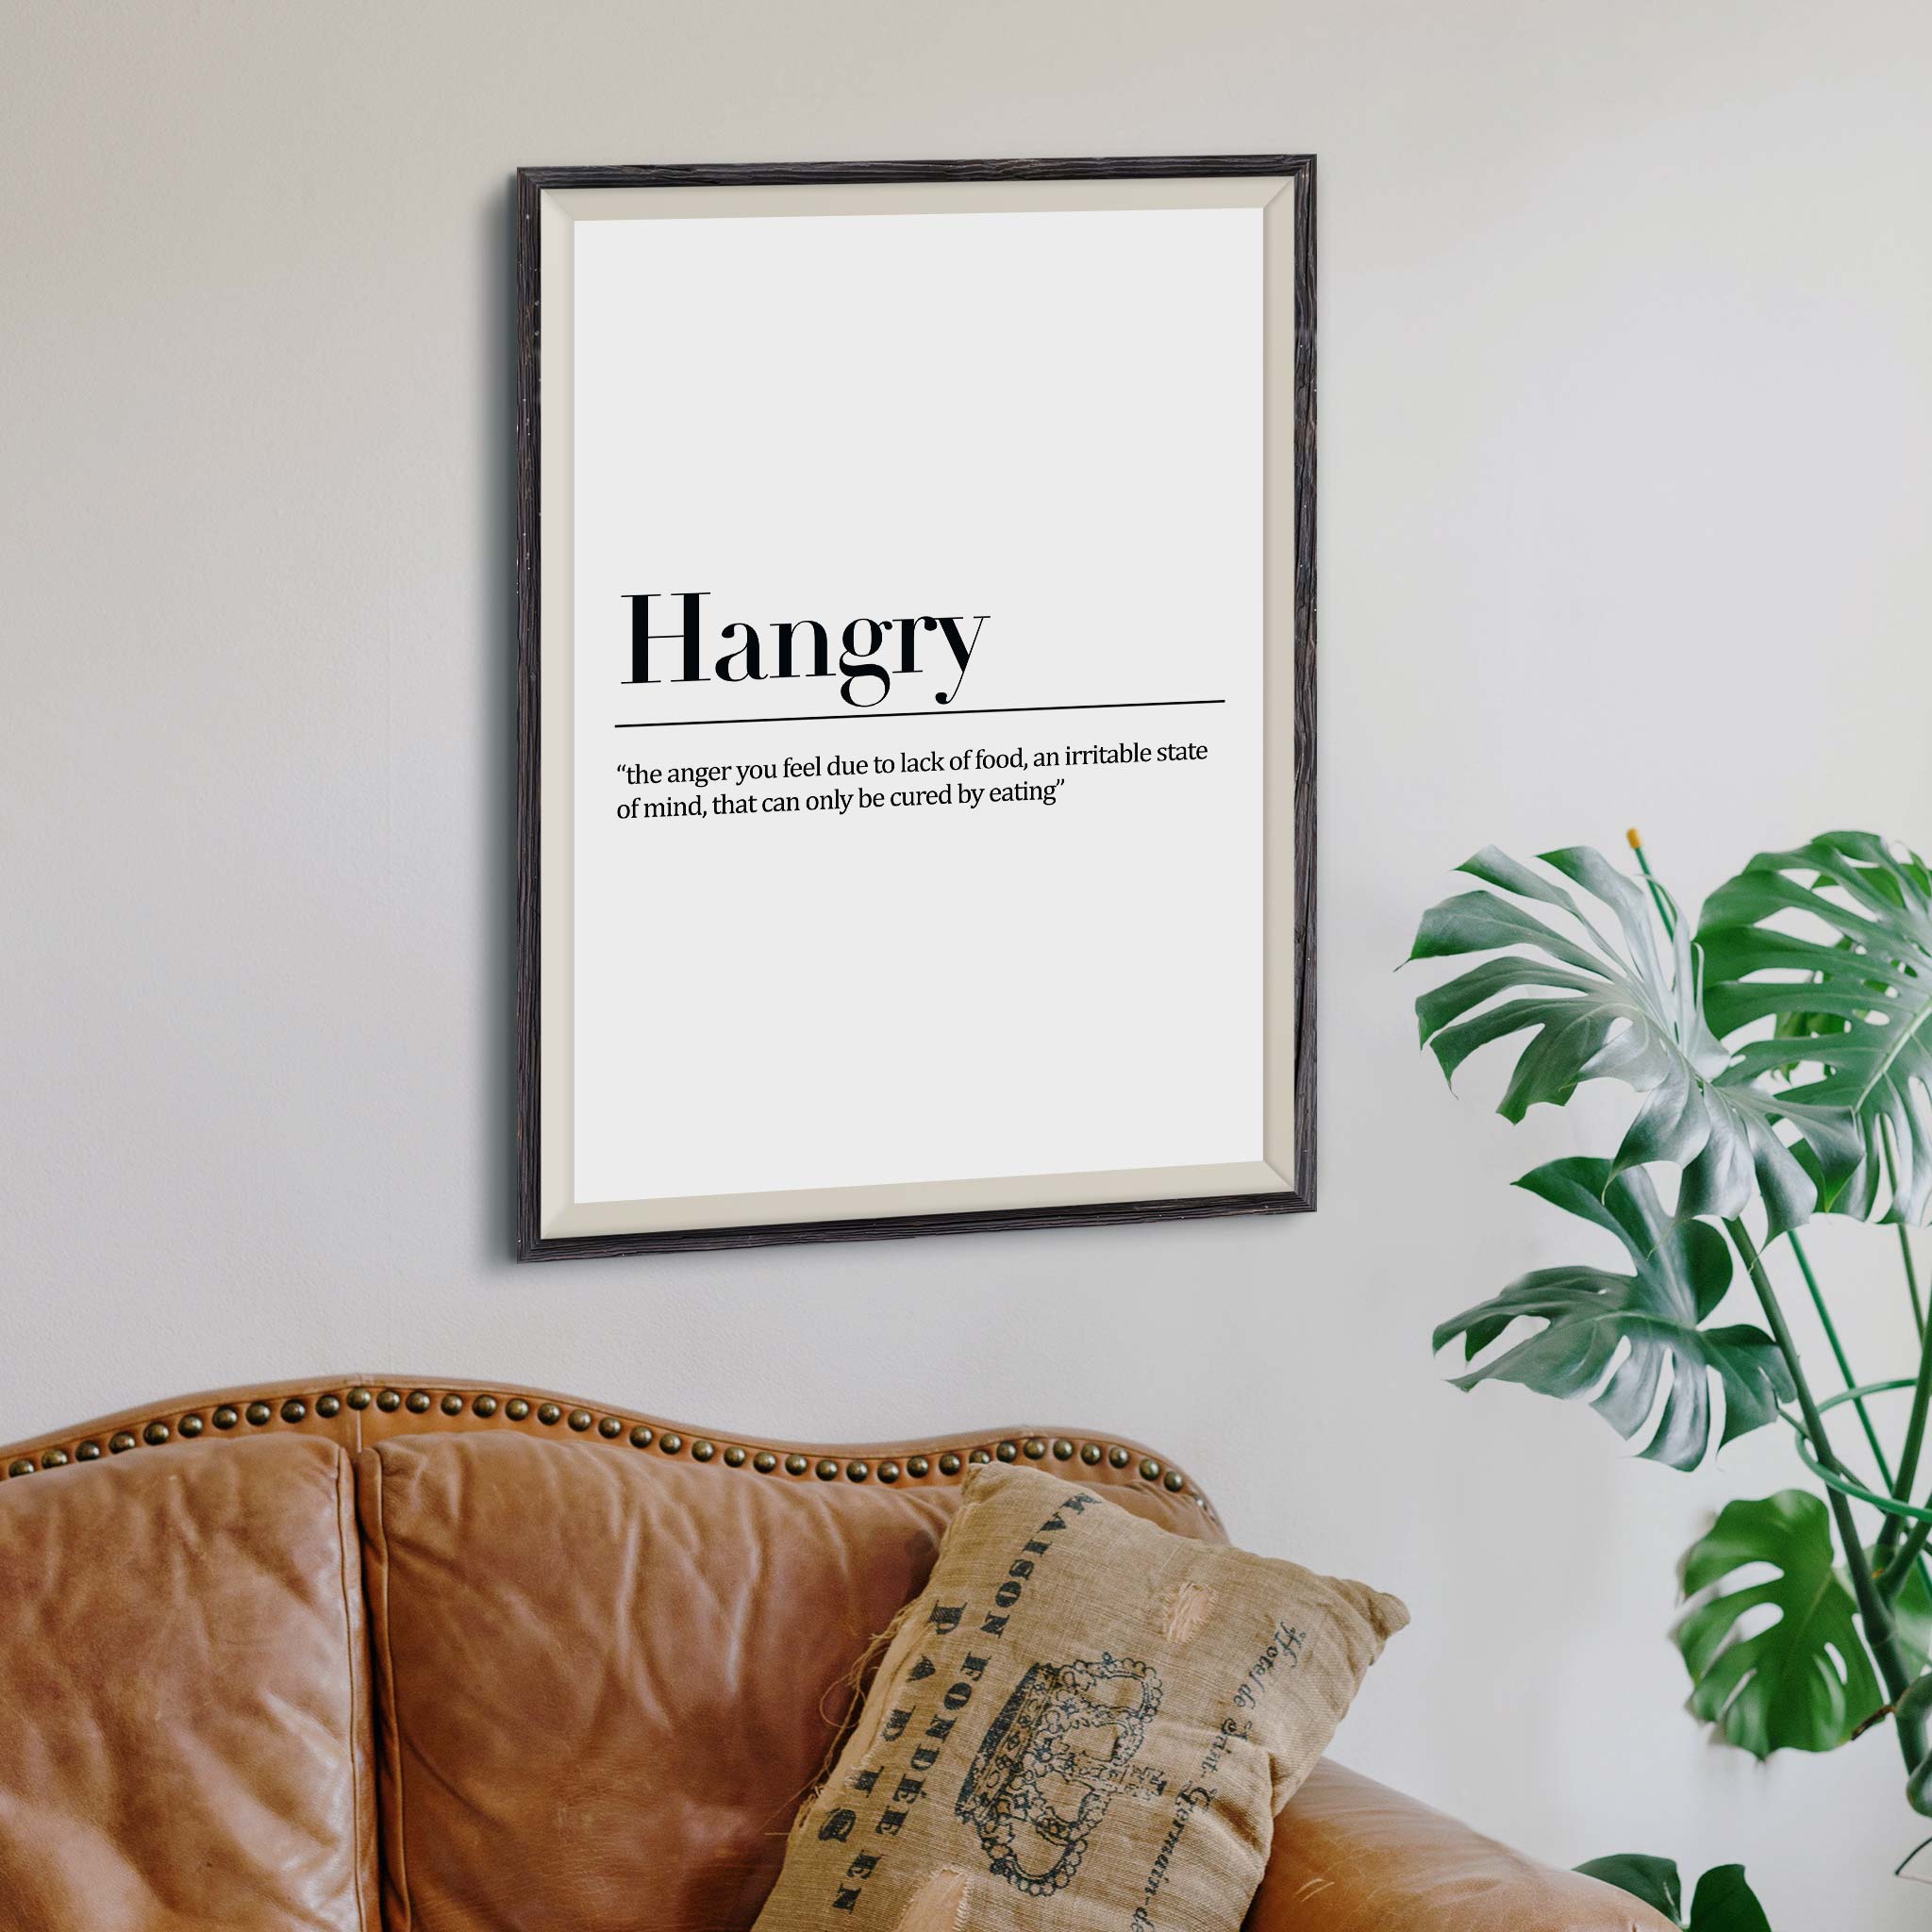 Hangry- 'the anger you feel due to lack of food, an irritable state of mind, that can only be cured by eating'